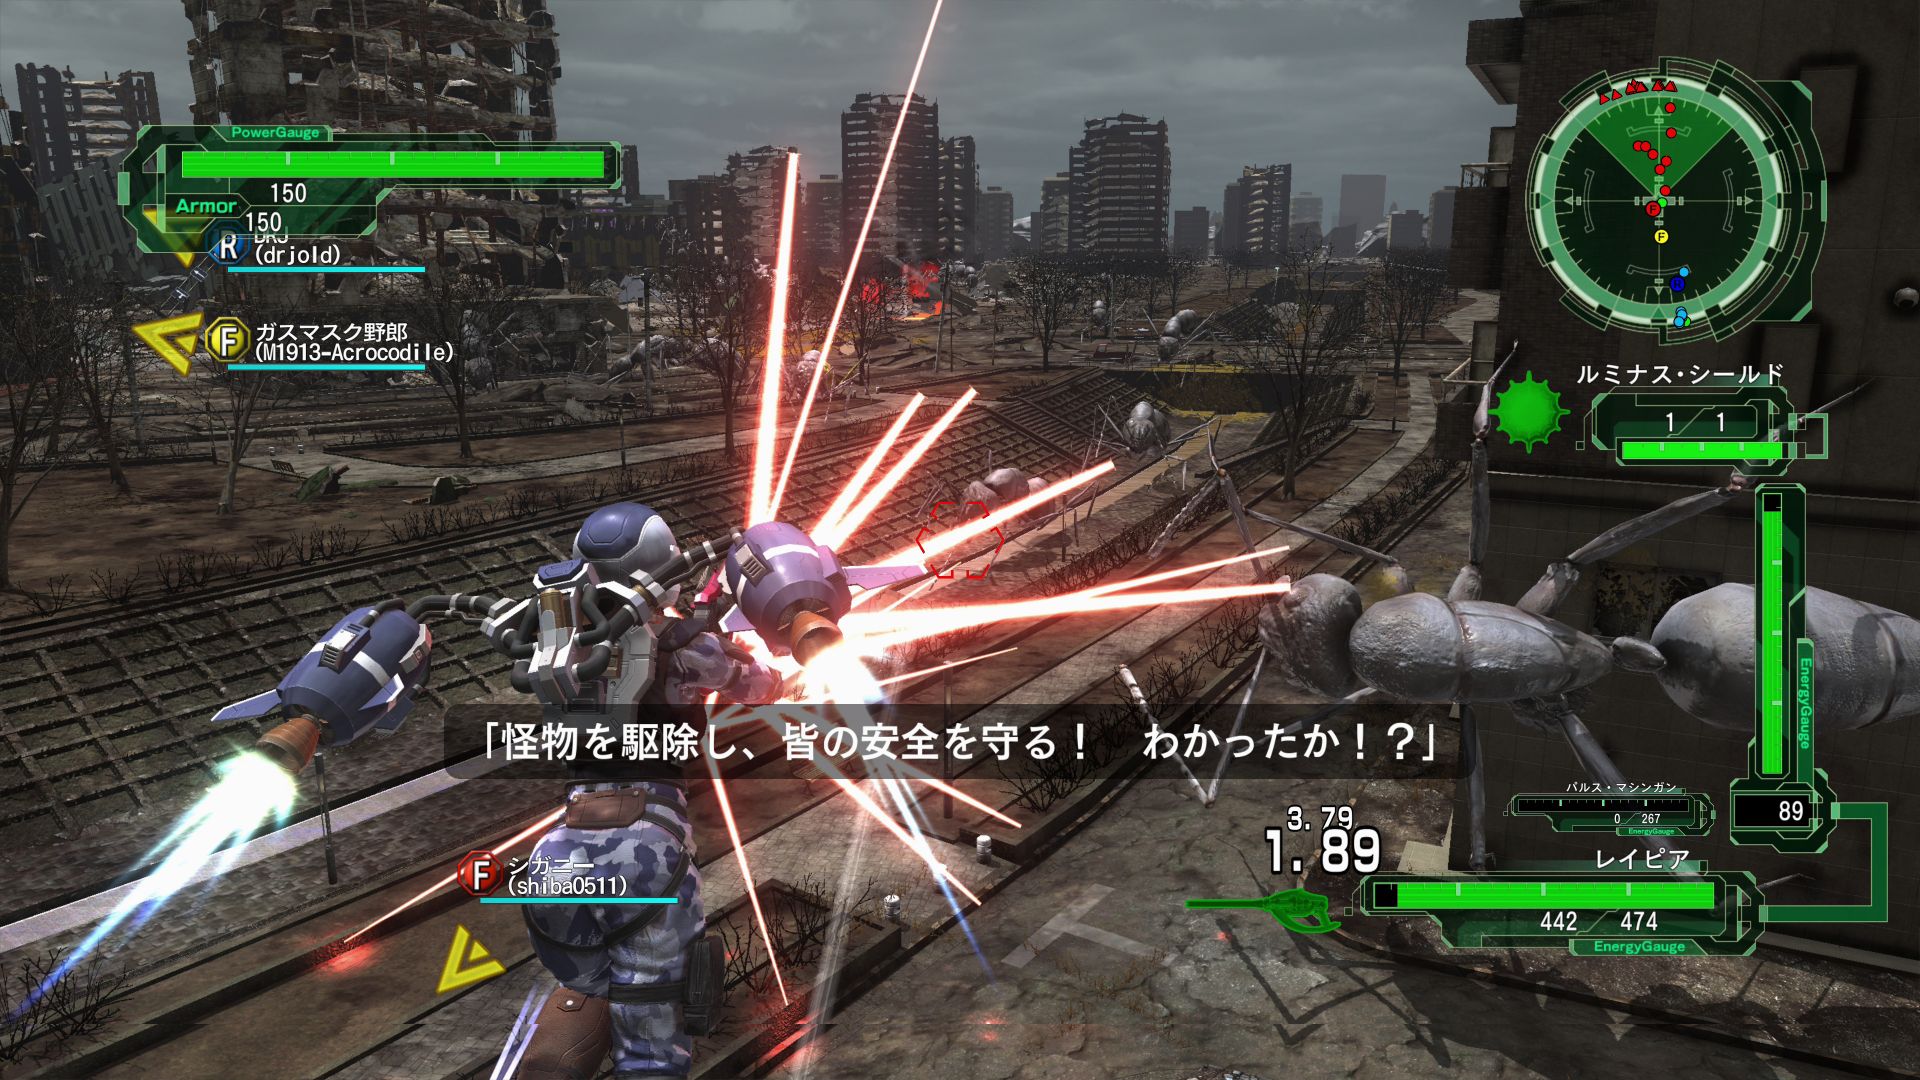 Earth Defense Force 6 Gameplay